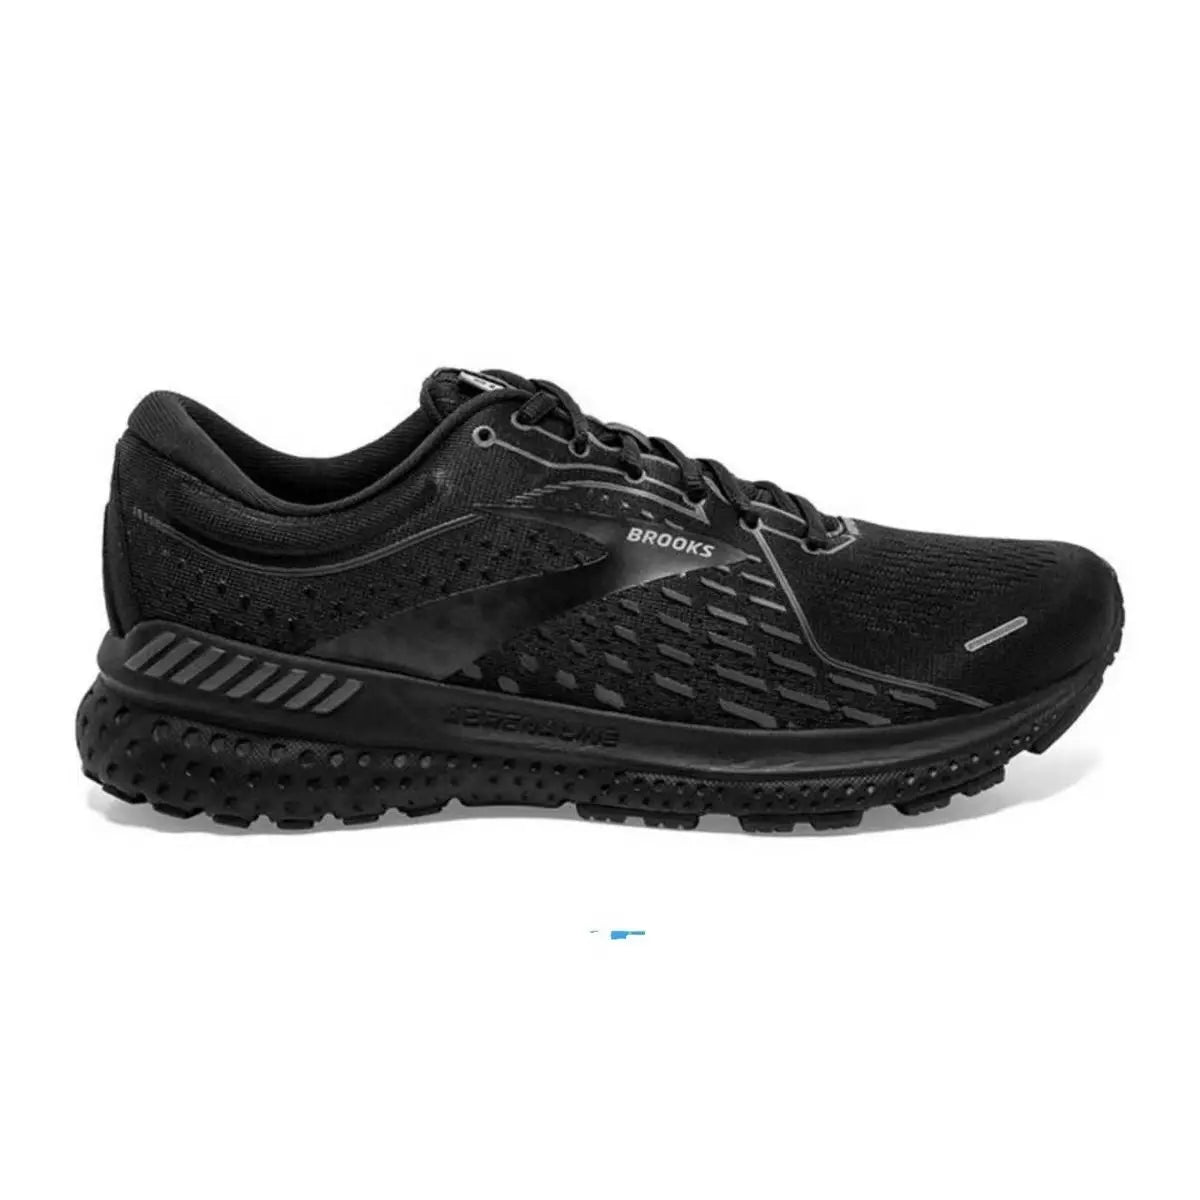 Brooks Adrenaline GTS 21 Men's Running Shoes - 4E Wide, Stable, Comfortable Sneakers